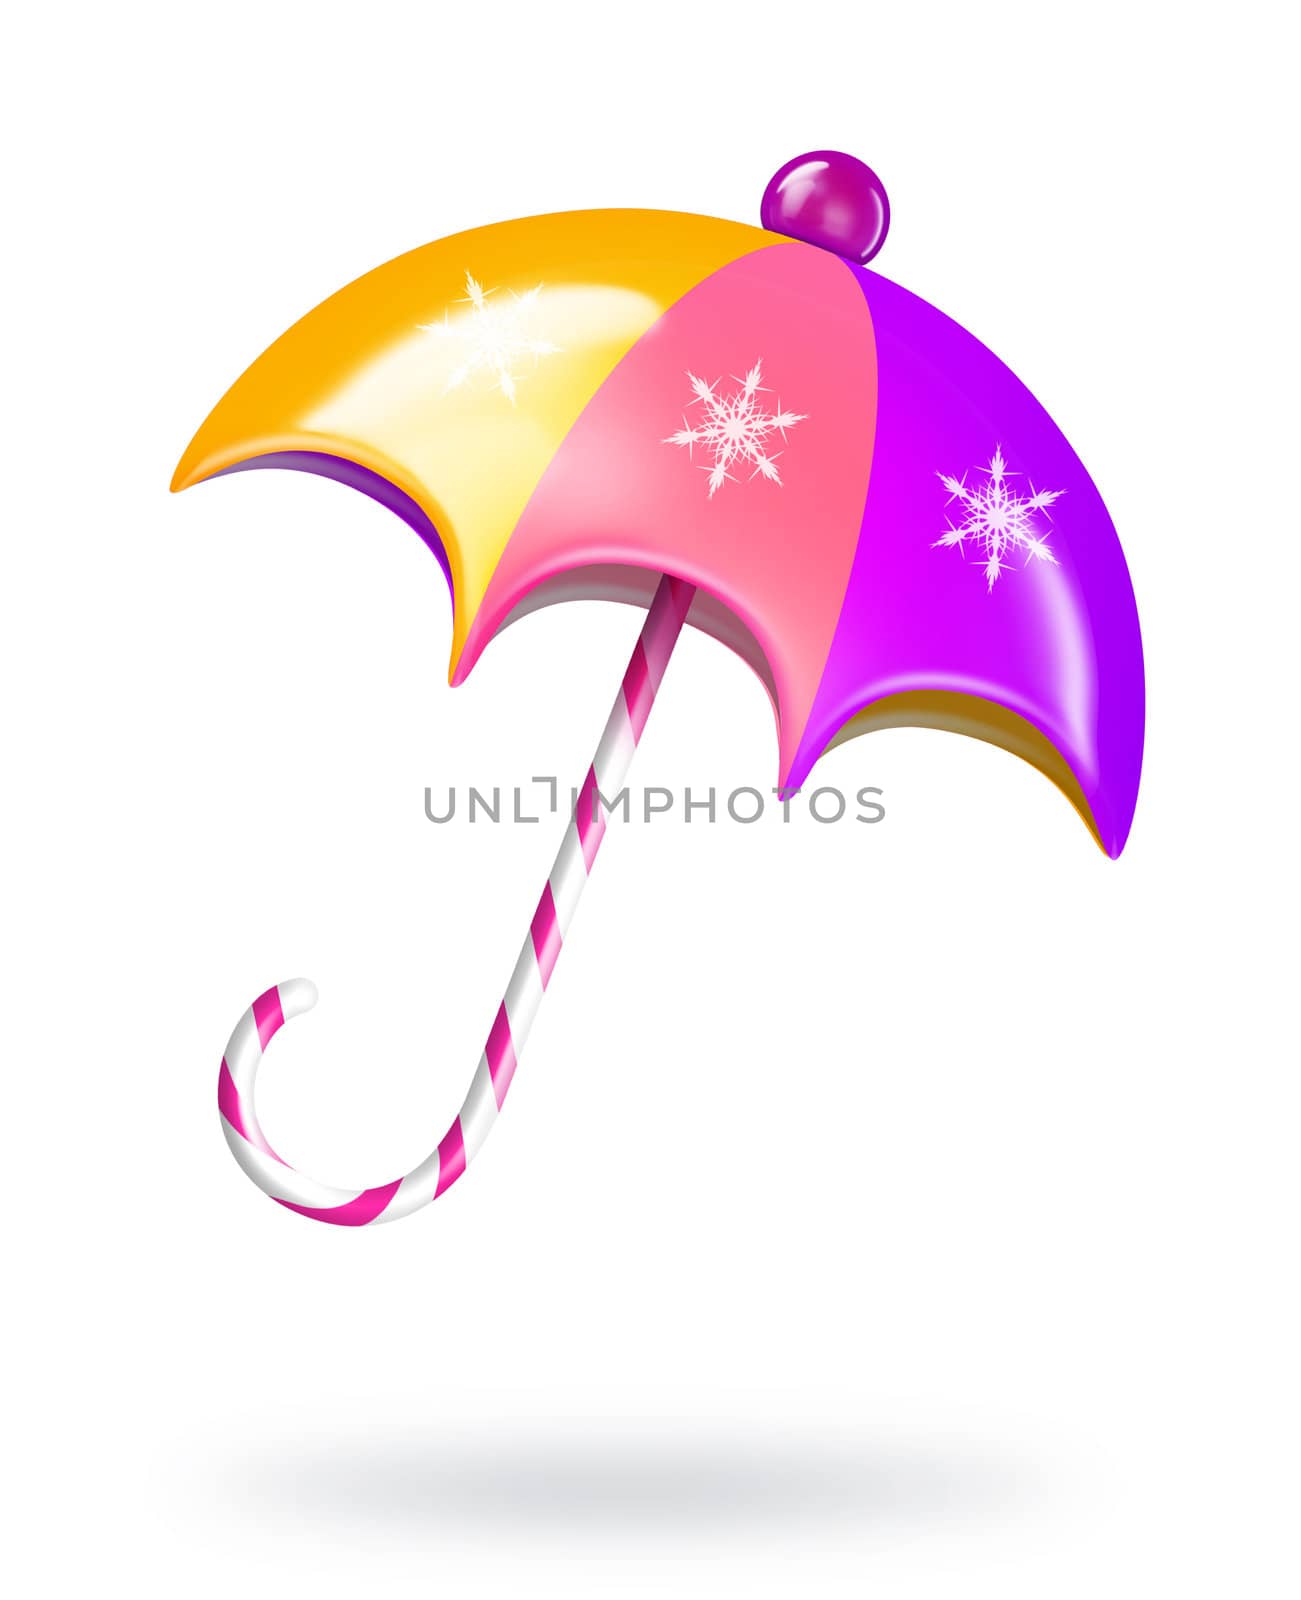 A colorful cartoon Christmas umbrella with candy cane handle.